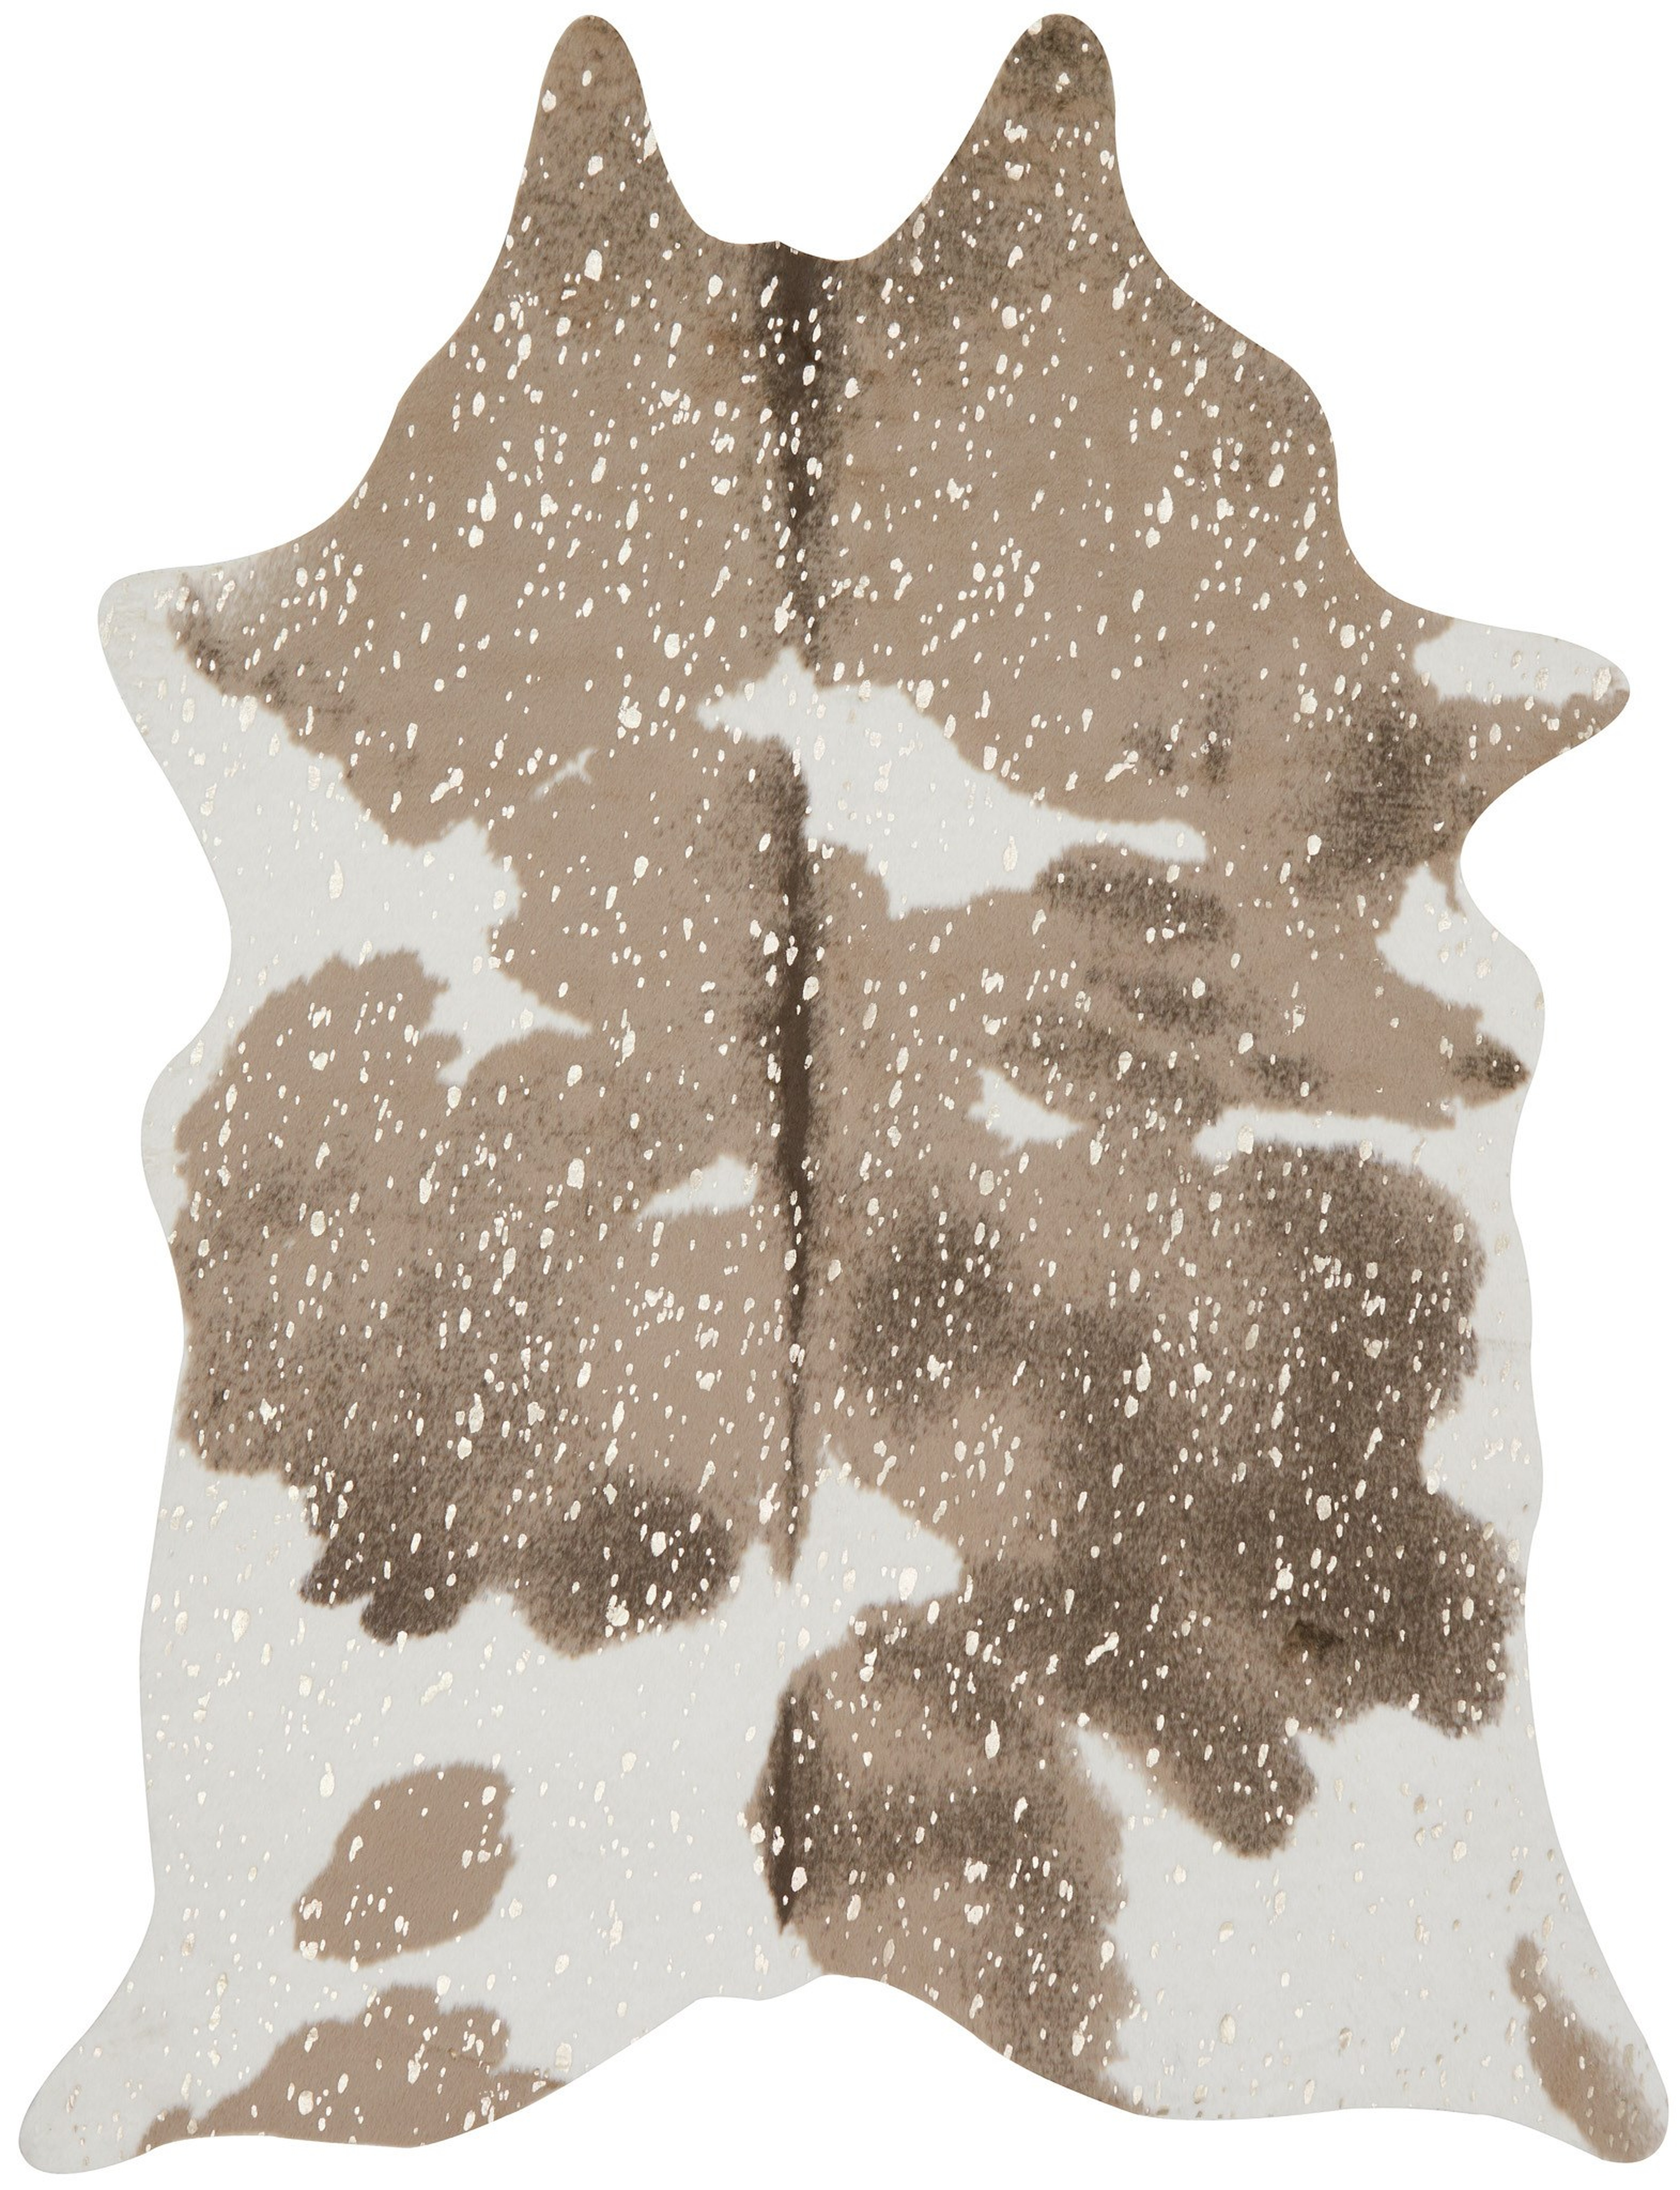 Bryce Cowhide Rug, 3'10" x 5', Taupe & Champagne - Loma Threads